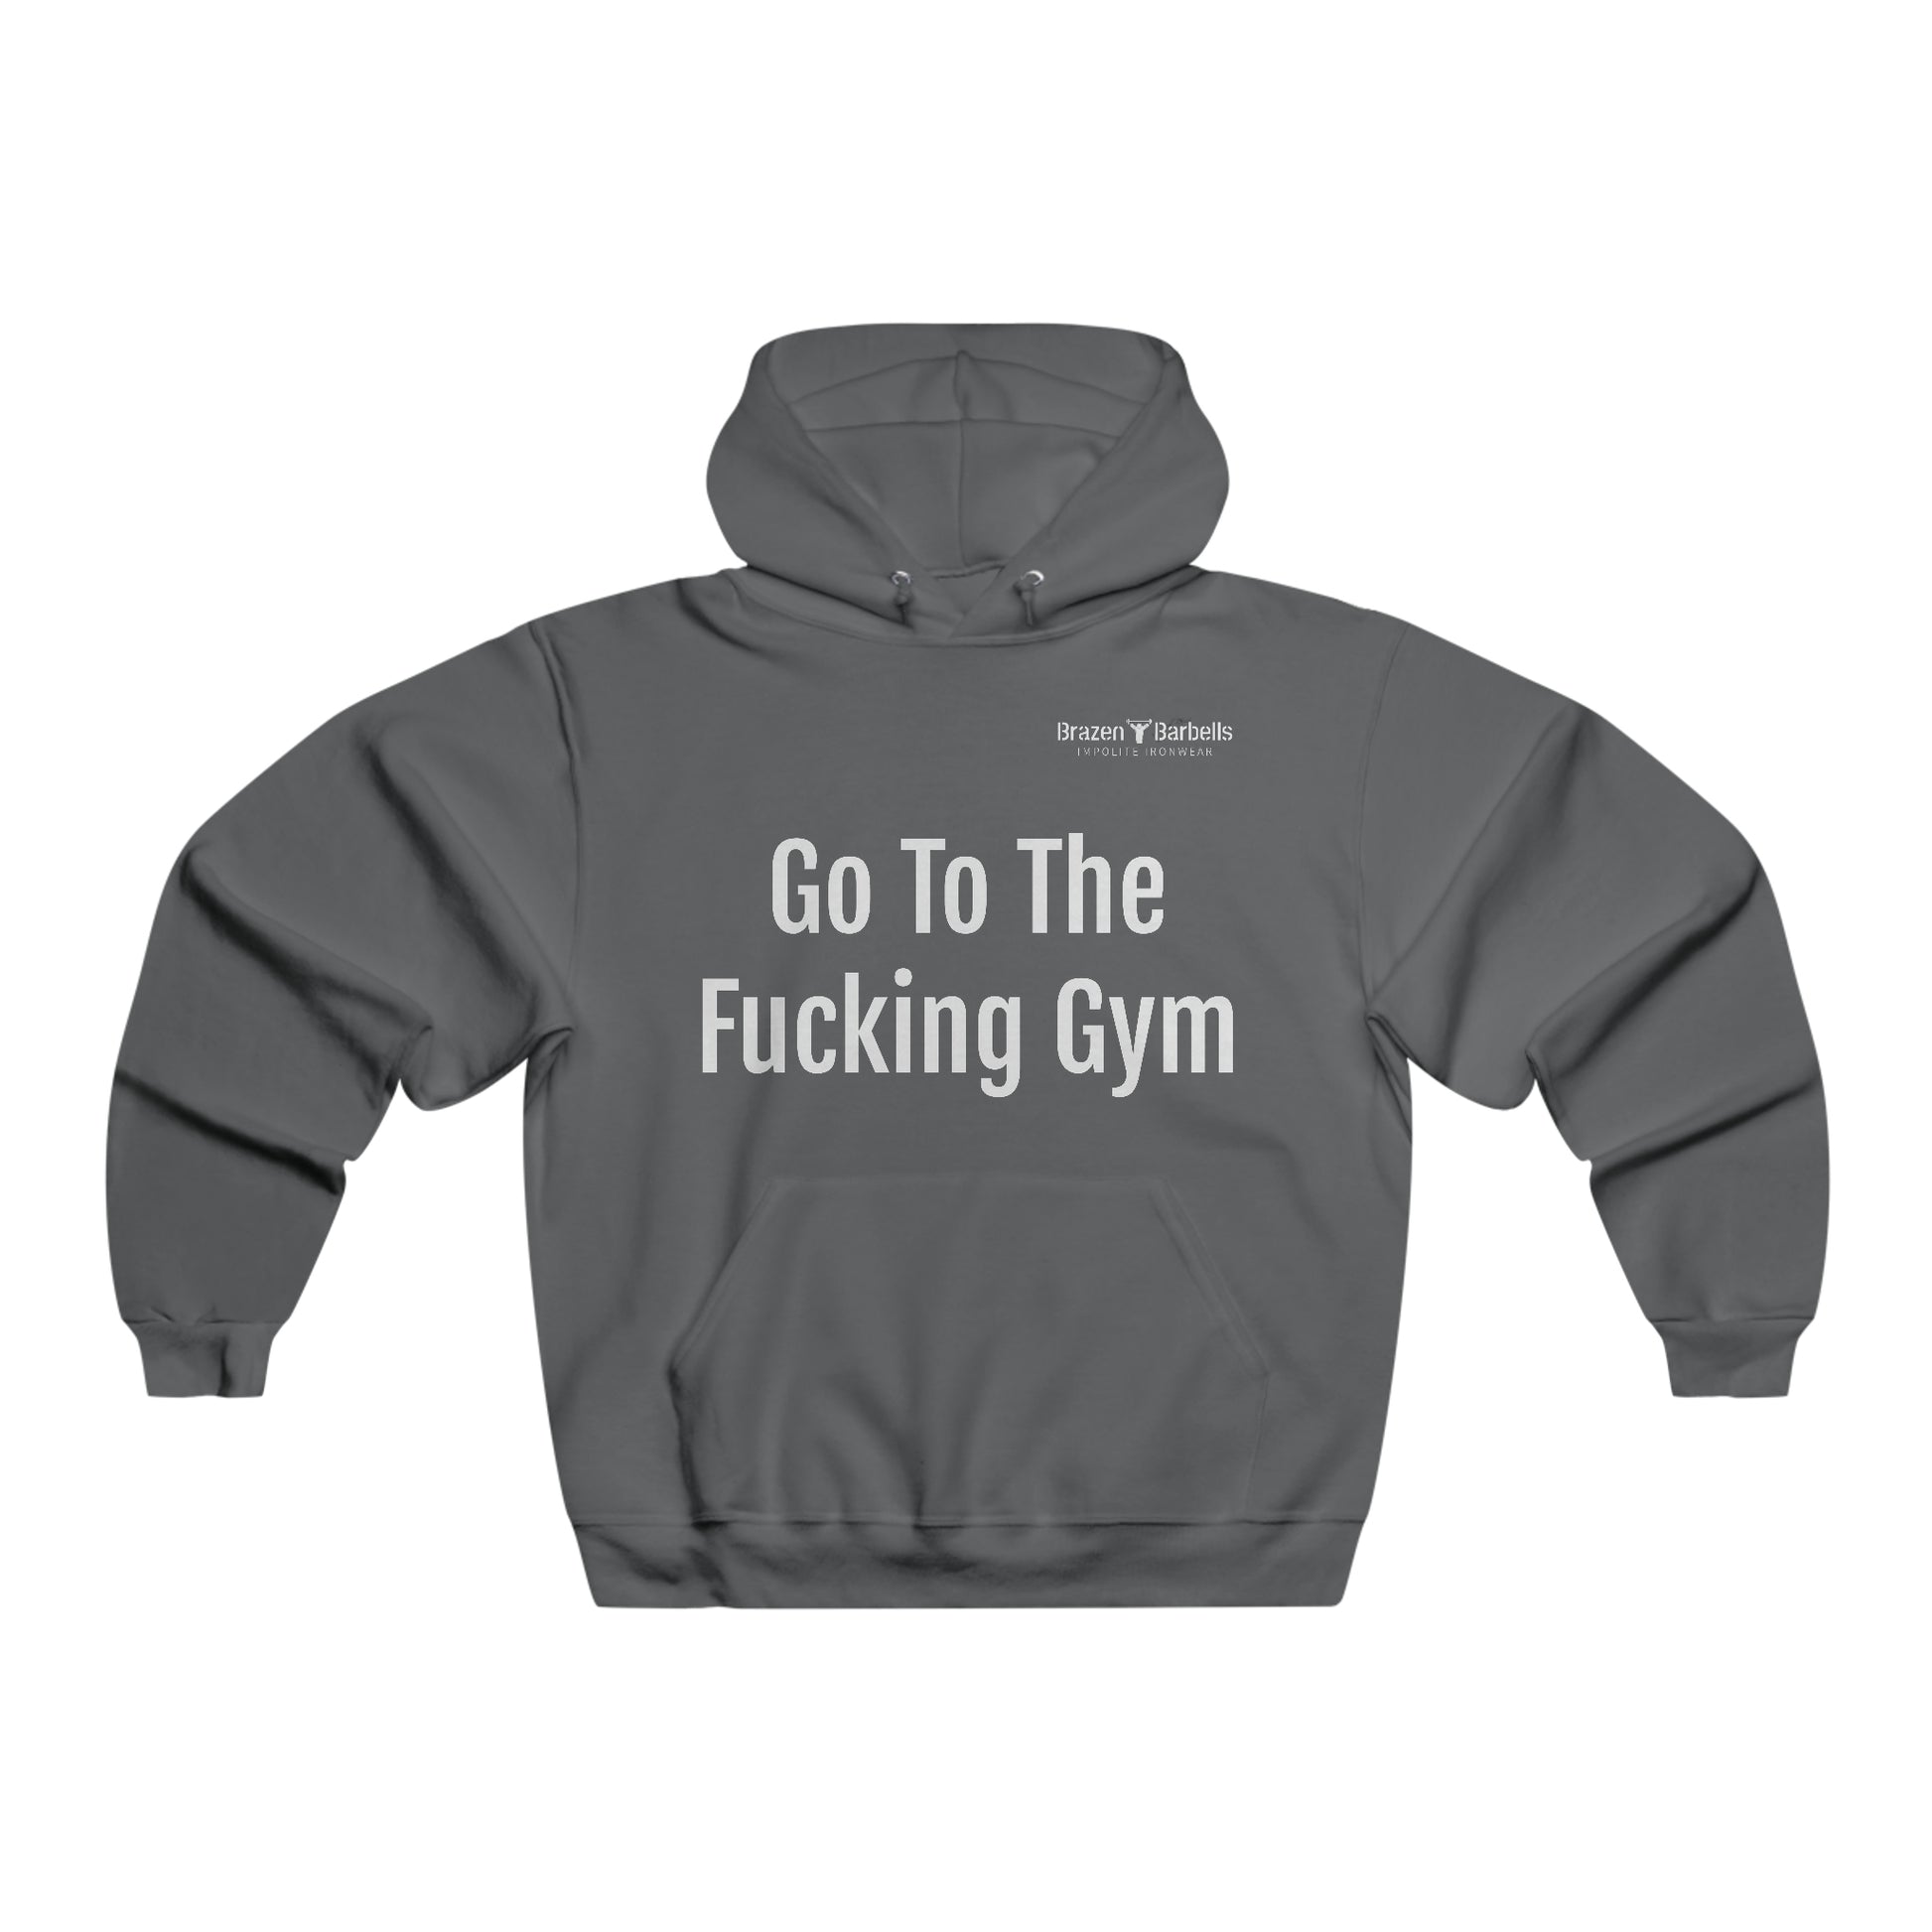 The Hoodie Dilemma: Gym Fashion and Function, by Dariohenry